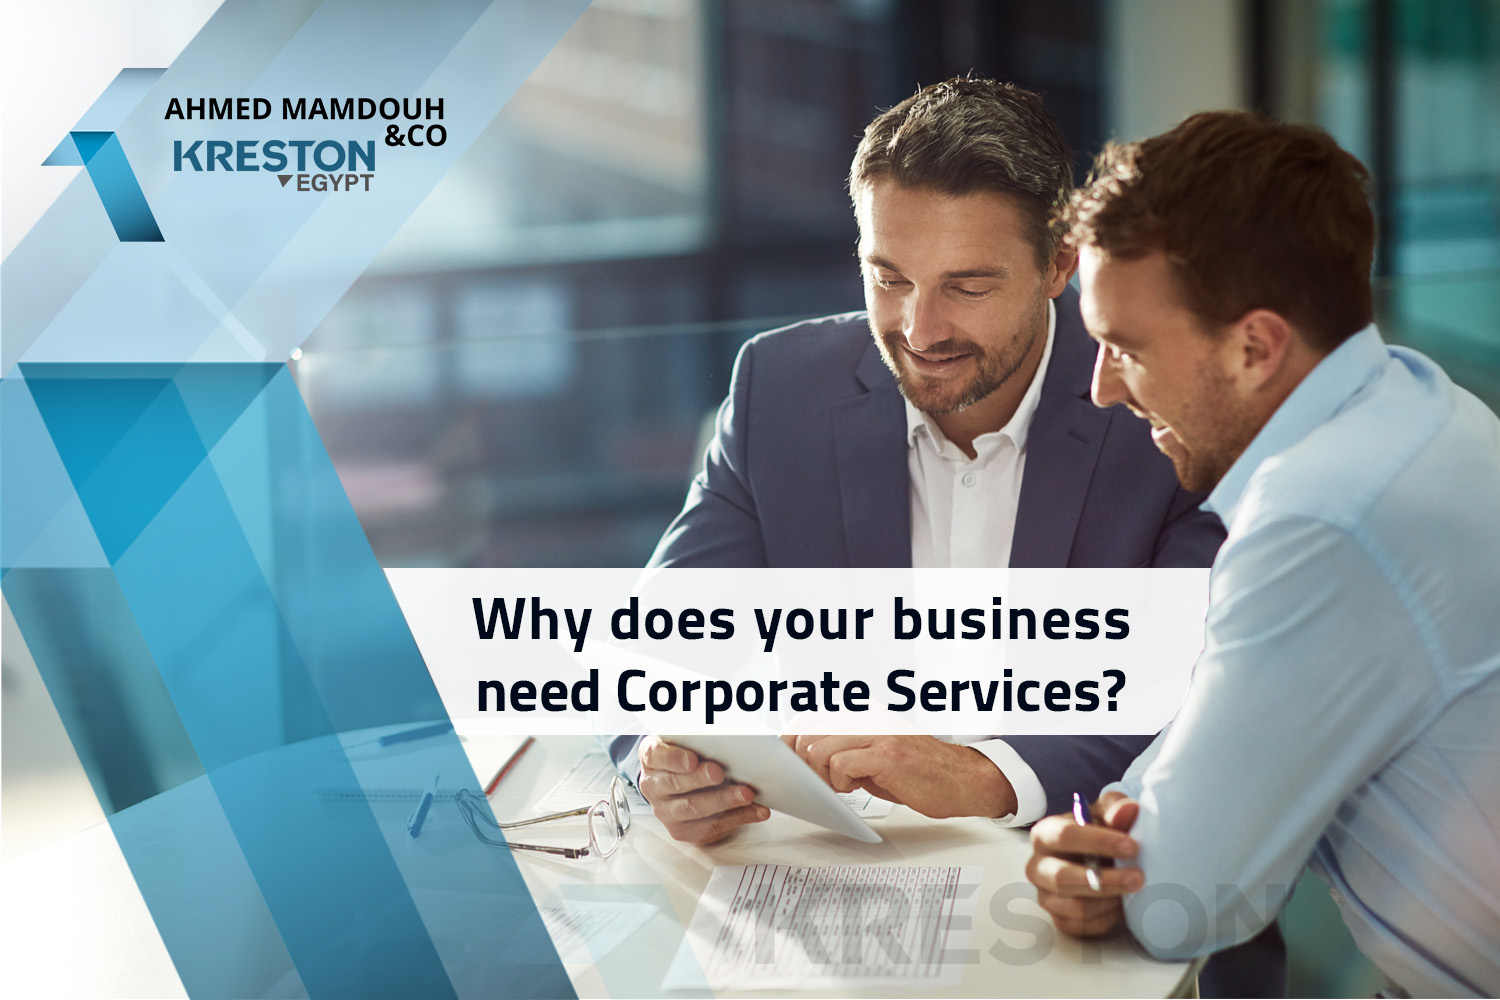 Why does your business need Corporate Services?